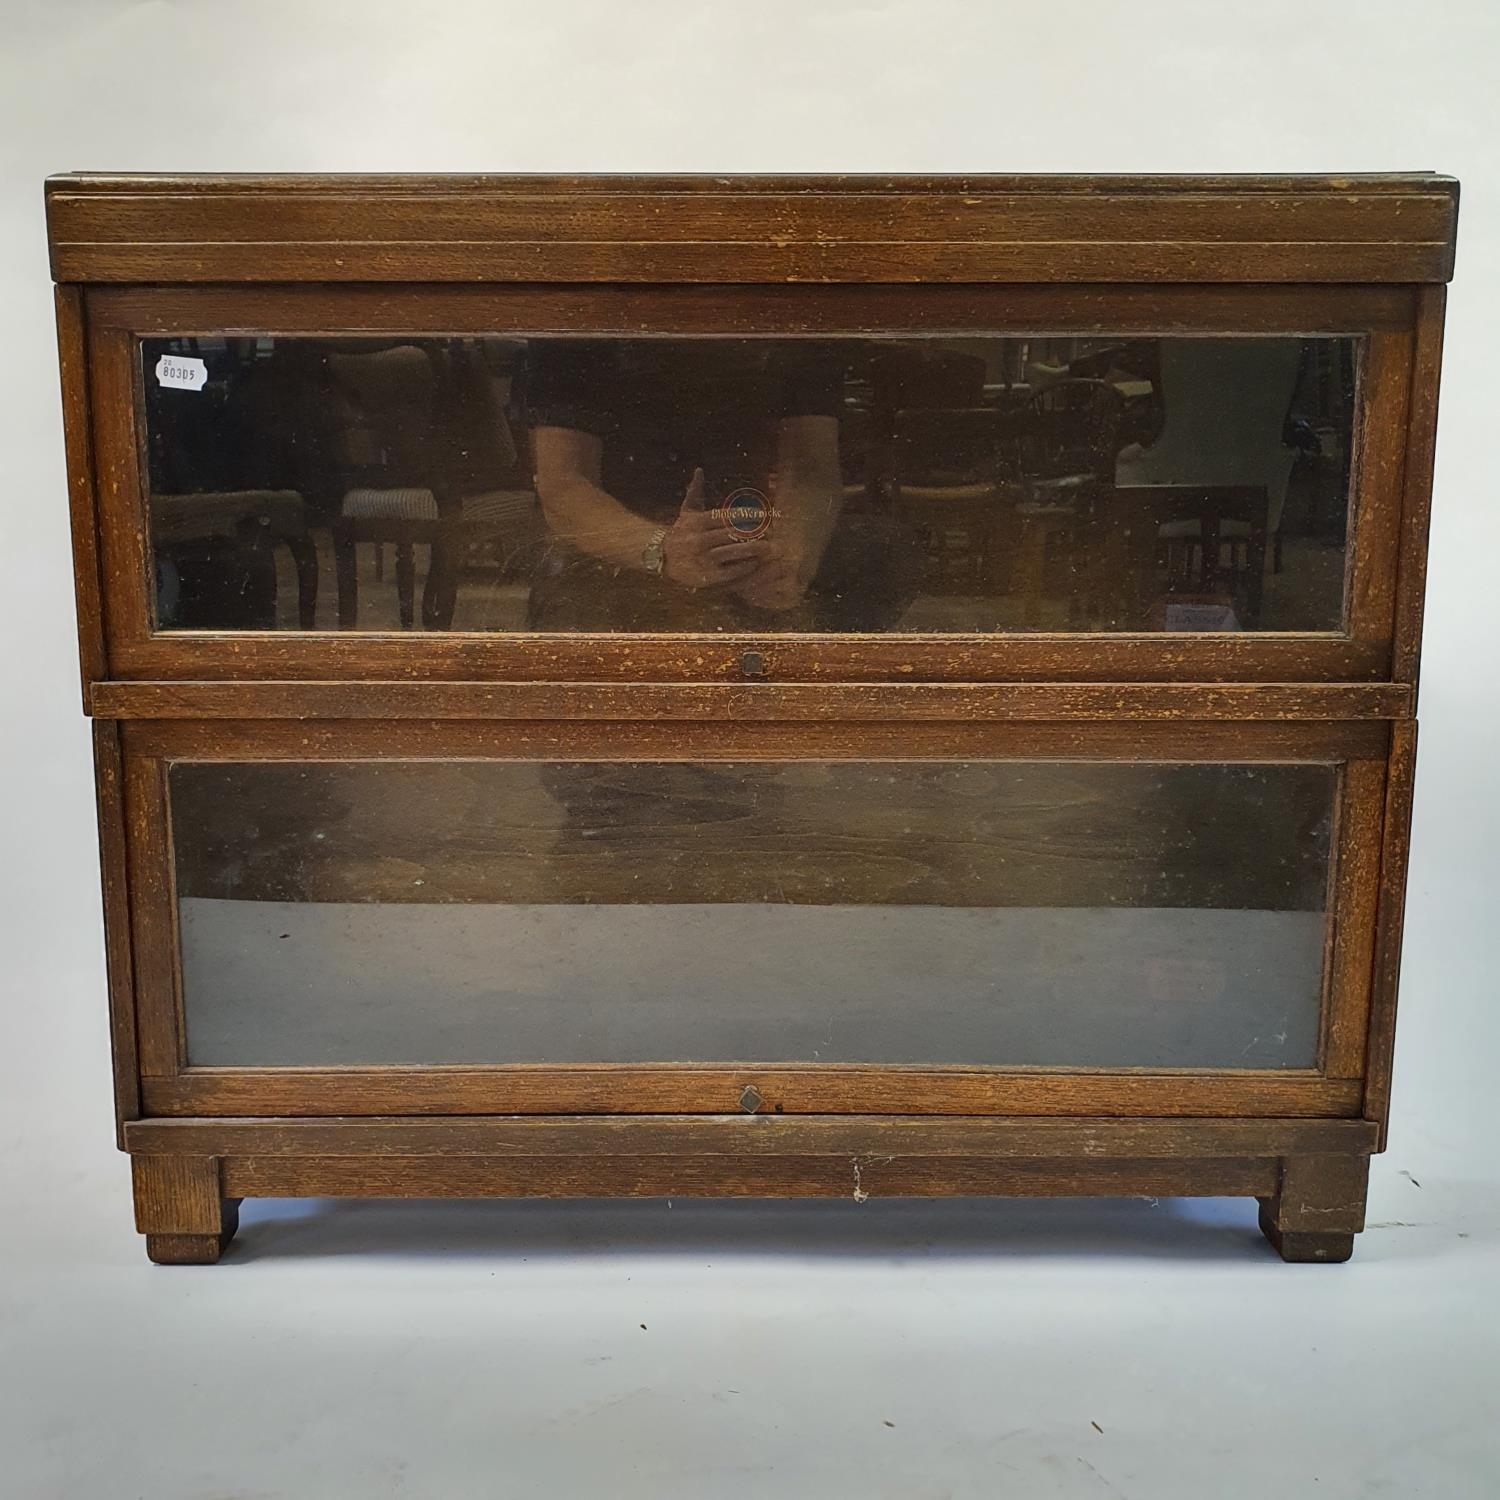 A Globe Wernicke oak two section bookcase, 86 cm wide - Image 2 of 6